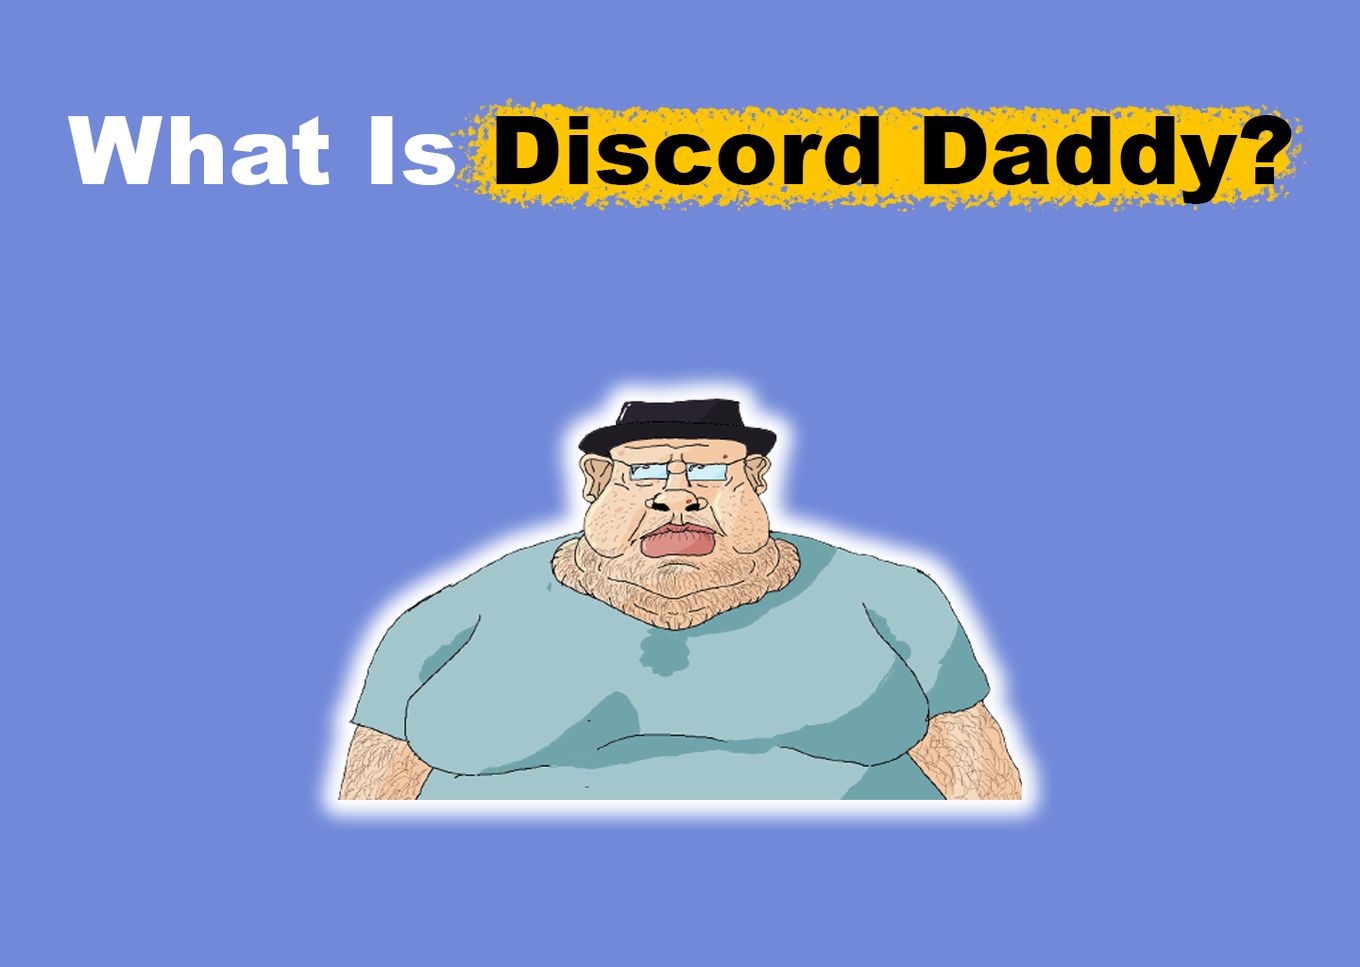 What Is a Discord Daddy